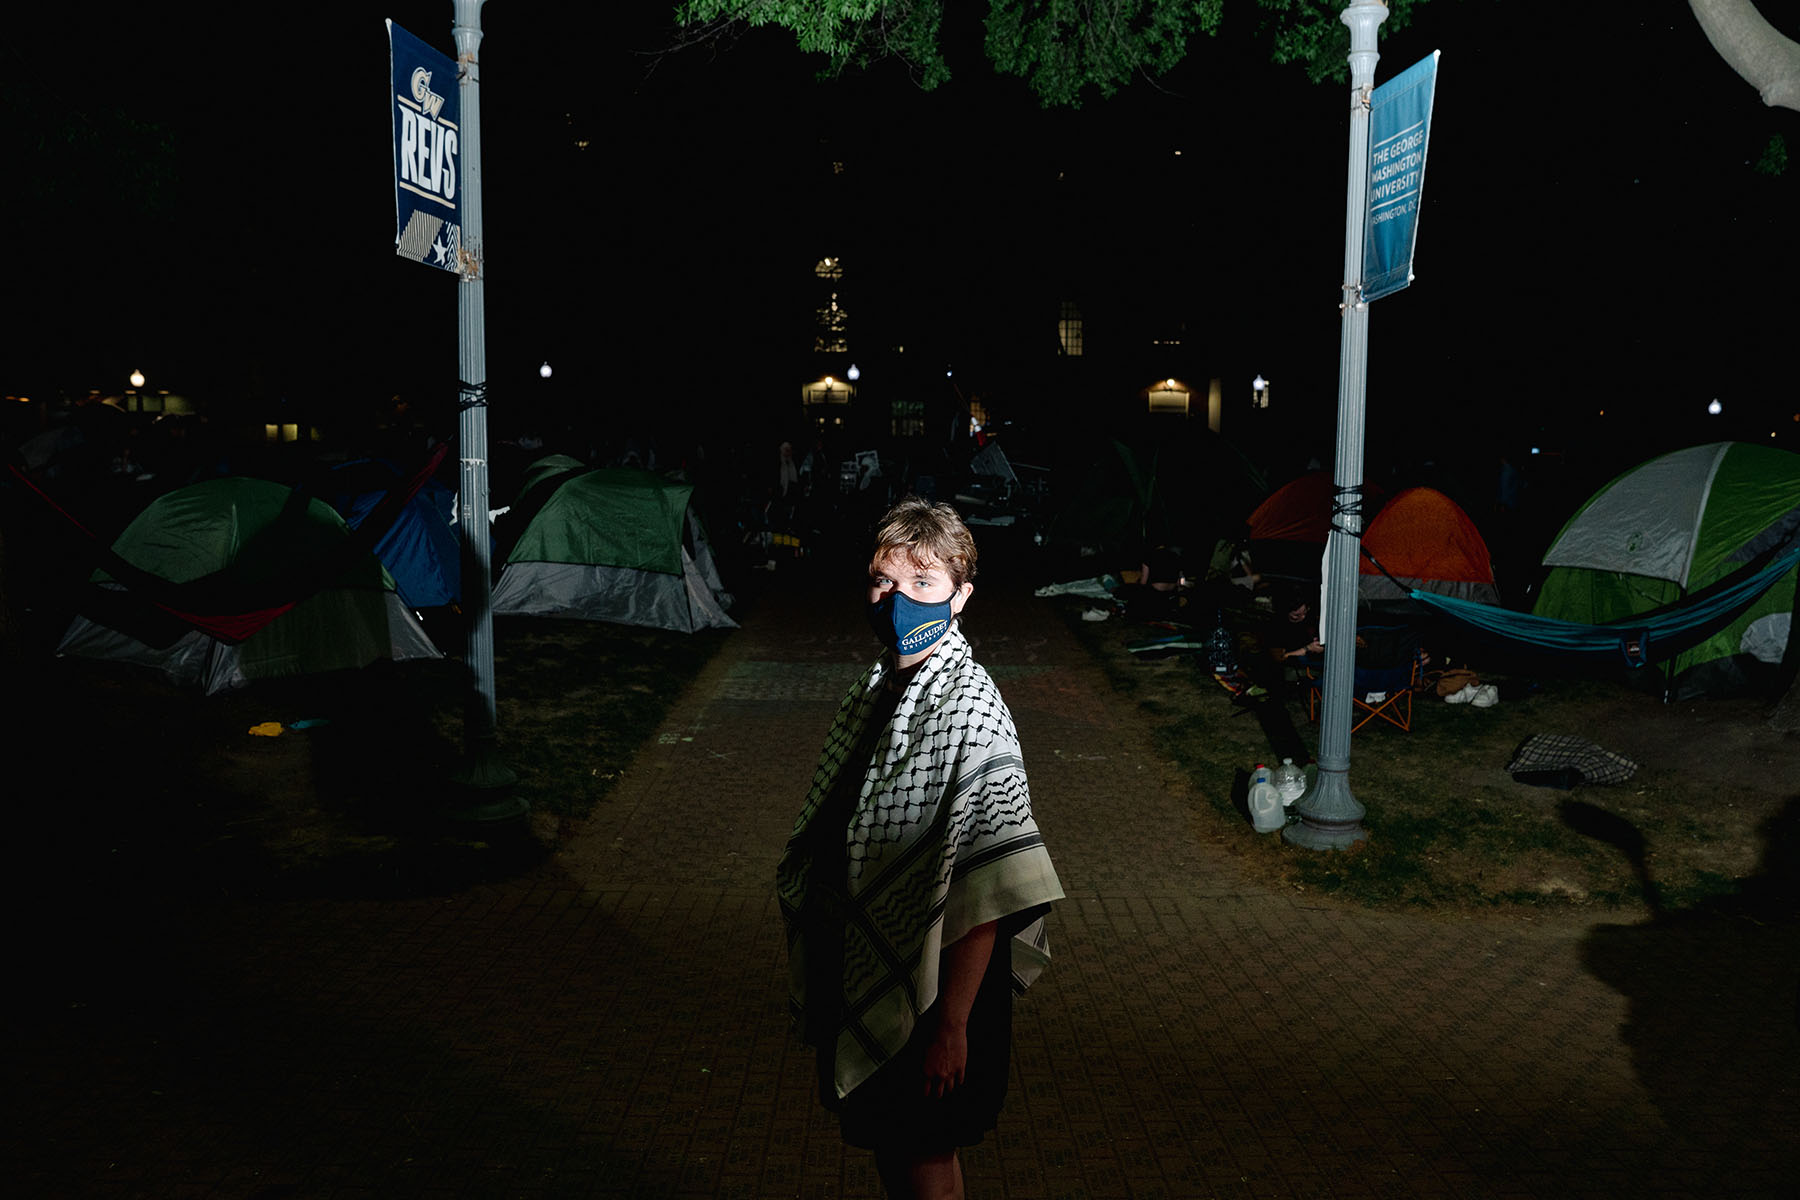 Elizabeth poses amidst tents at the George Washington University encampment. She is wearing a face mask and is drapped in a keffiyeh.